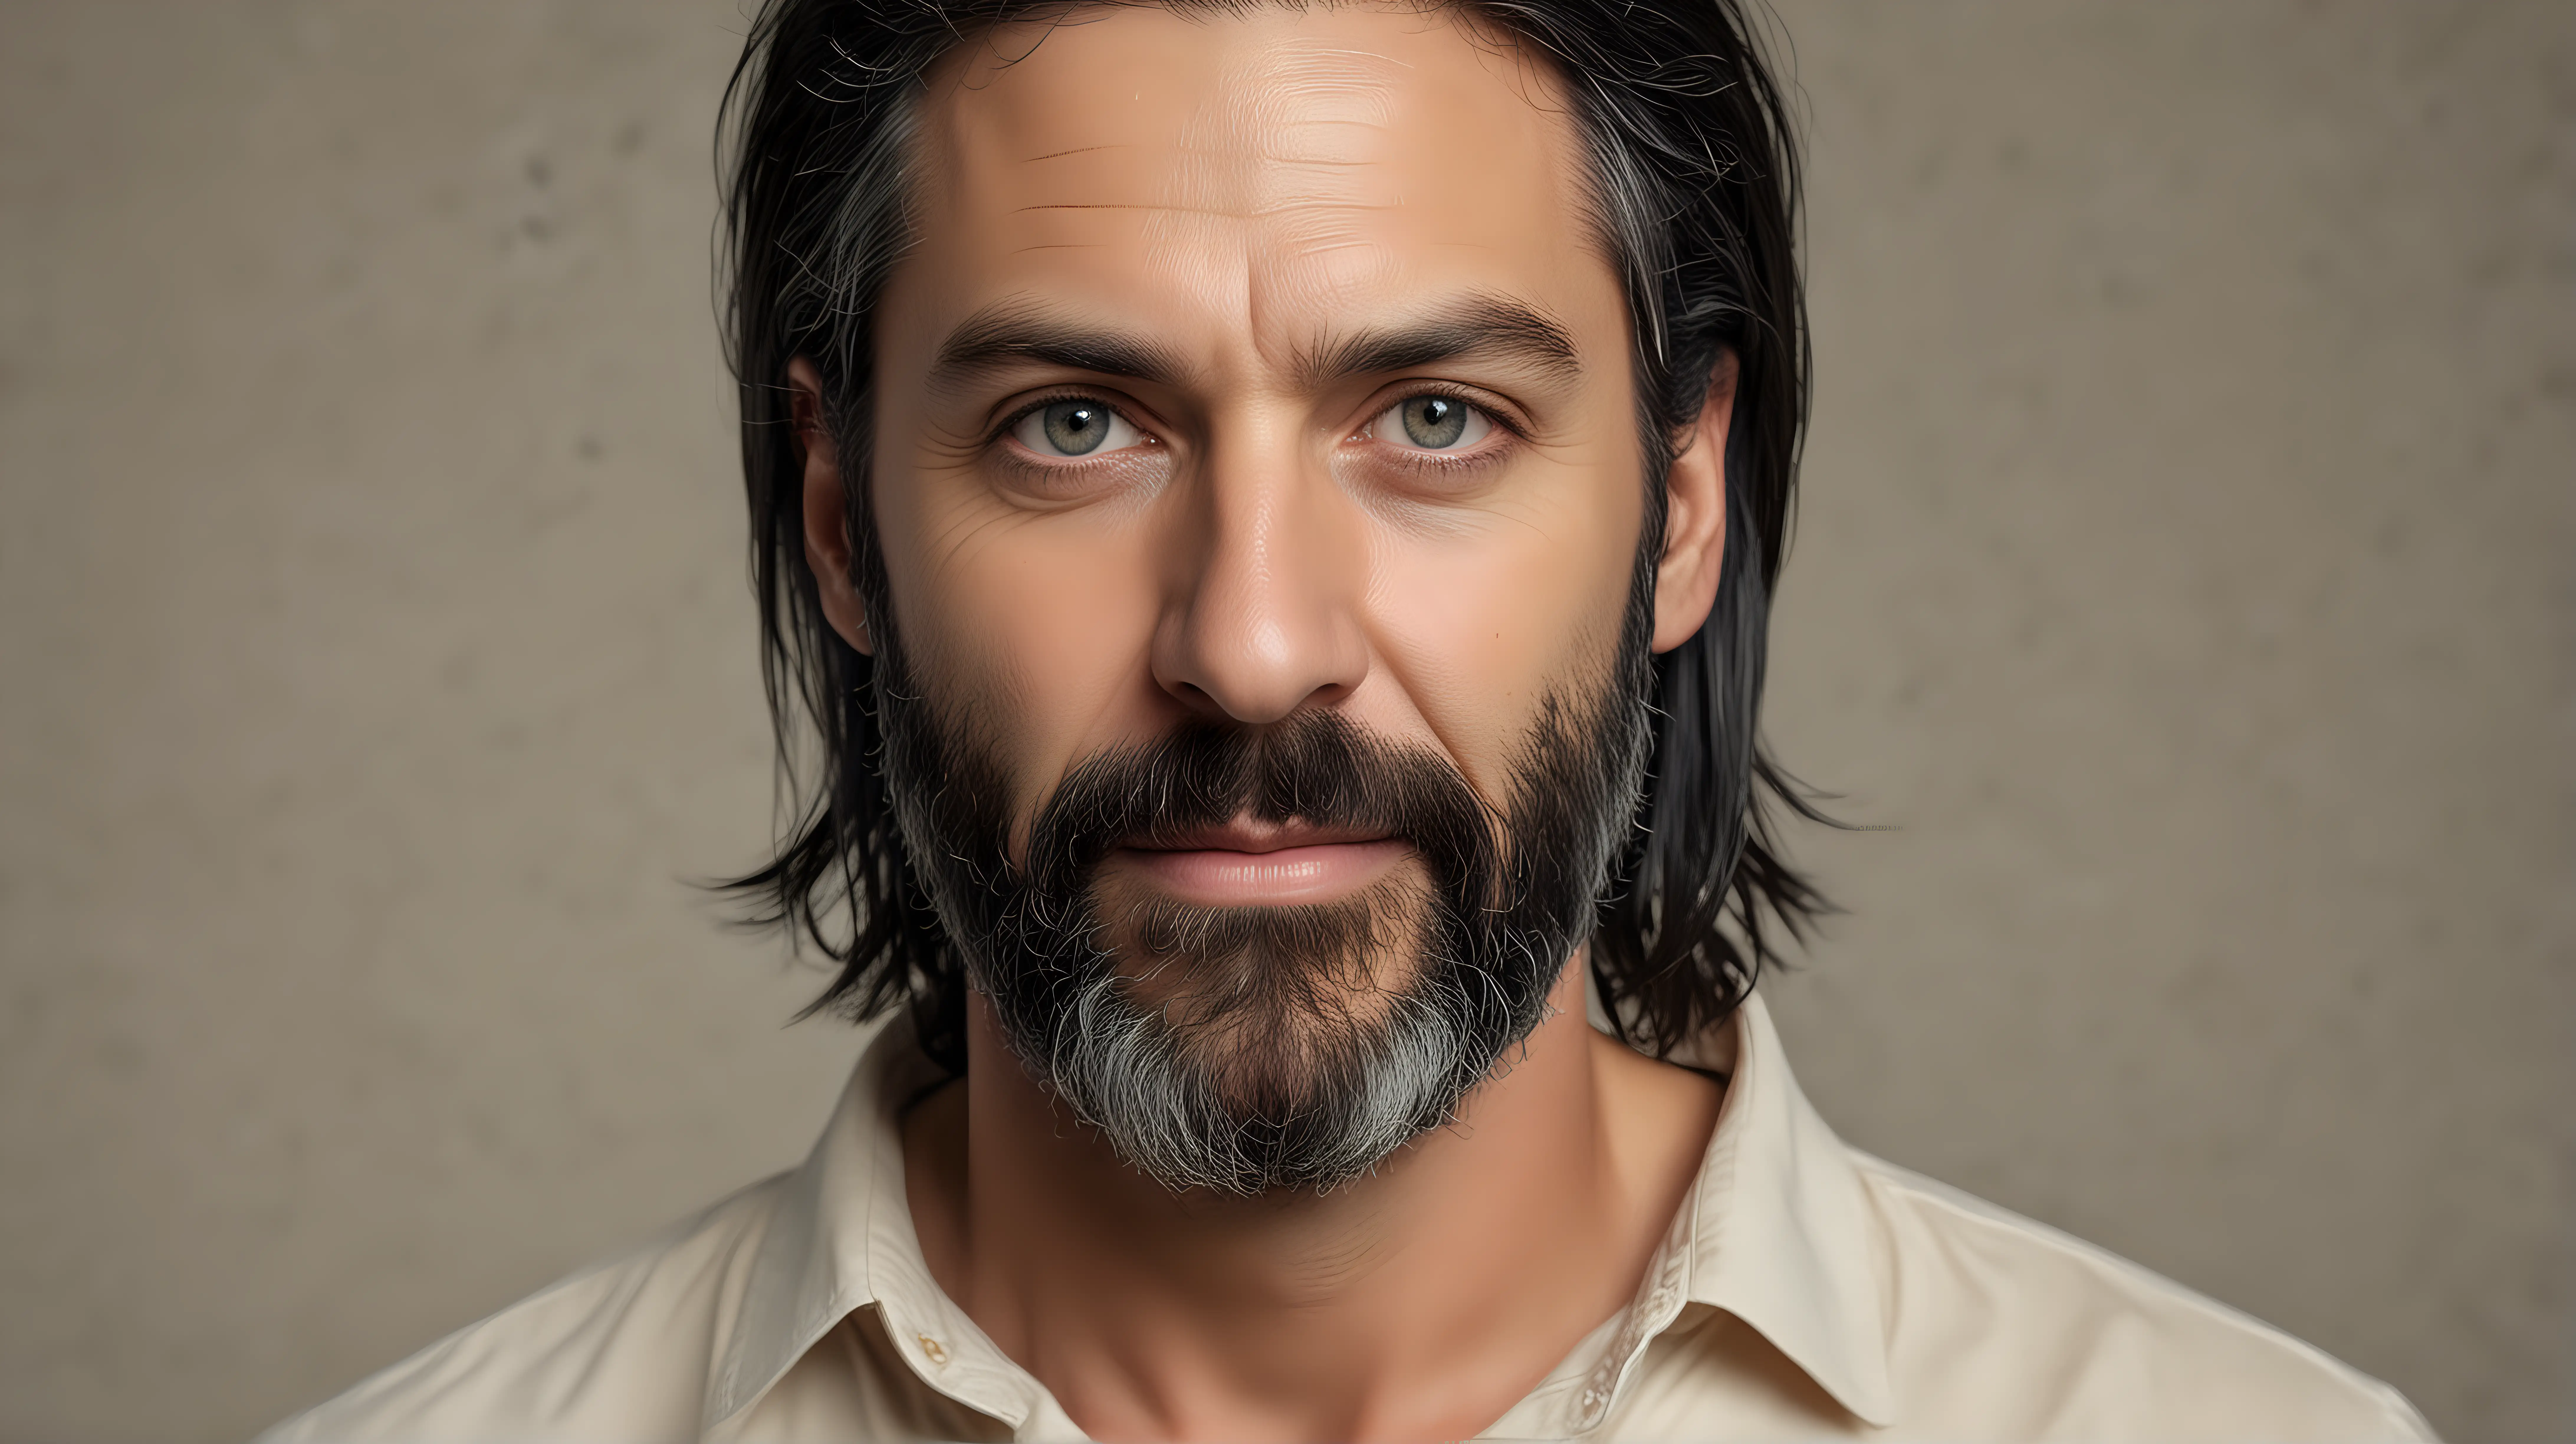 photo of a 45 year old man with long grey black hair,  beard, wearing a cream colored shirt, with symmetrical eyes, in 32k resolution